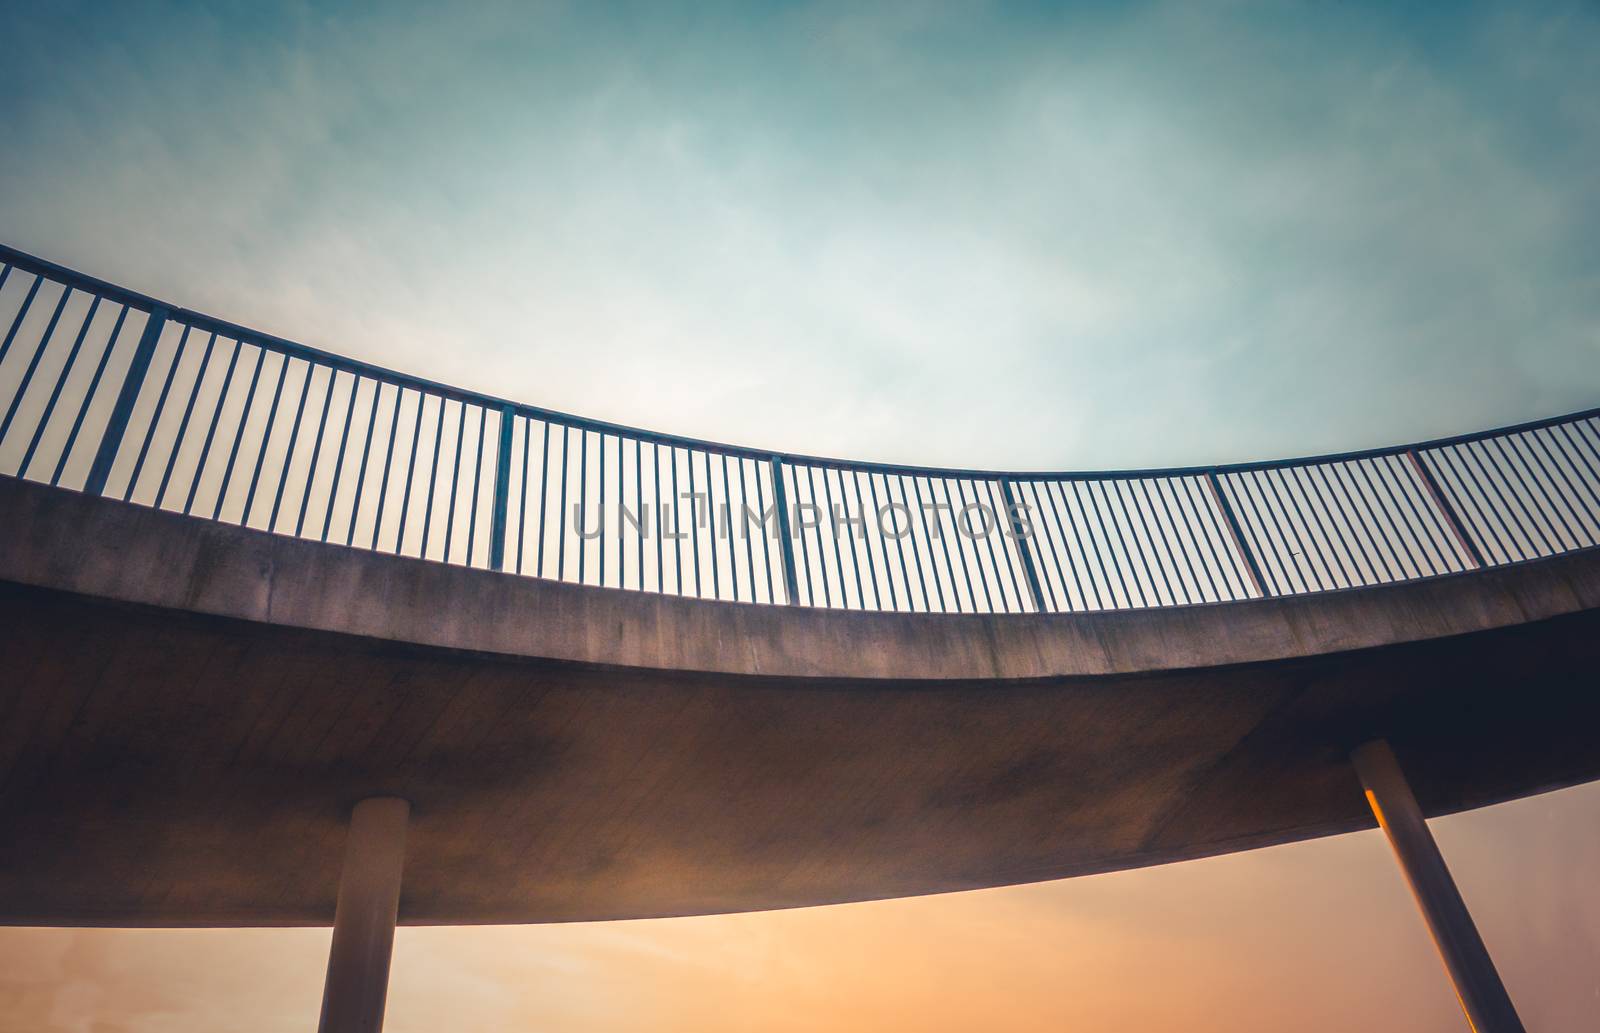 Abstract Curved Overpass Footbridge by mrdoomits